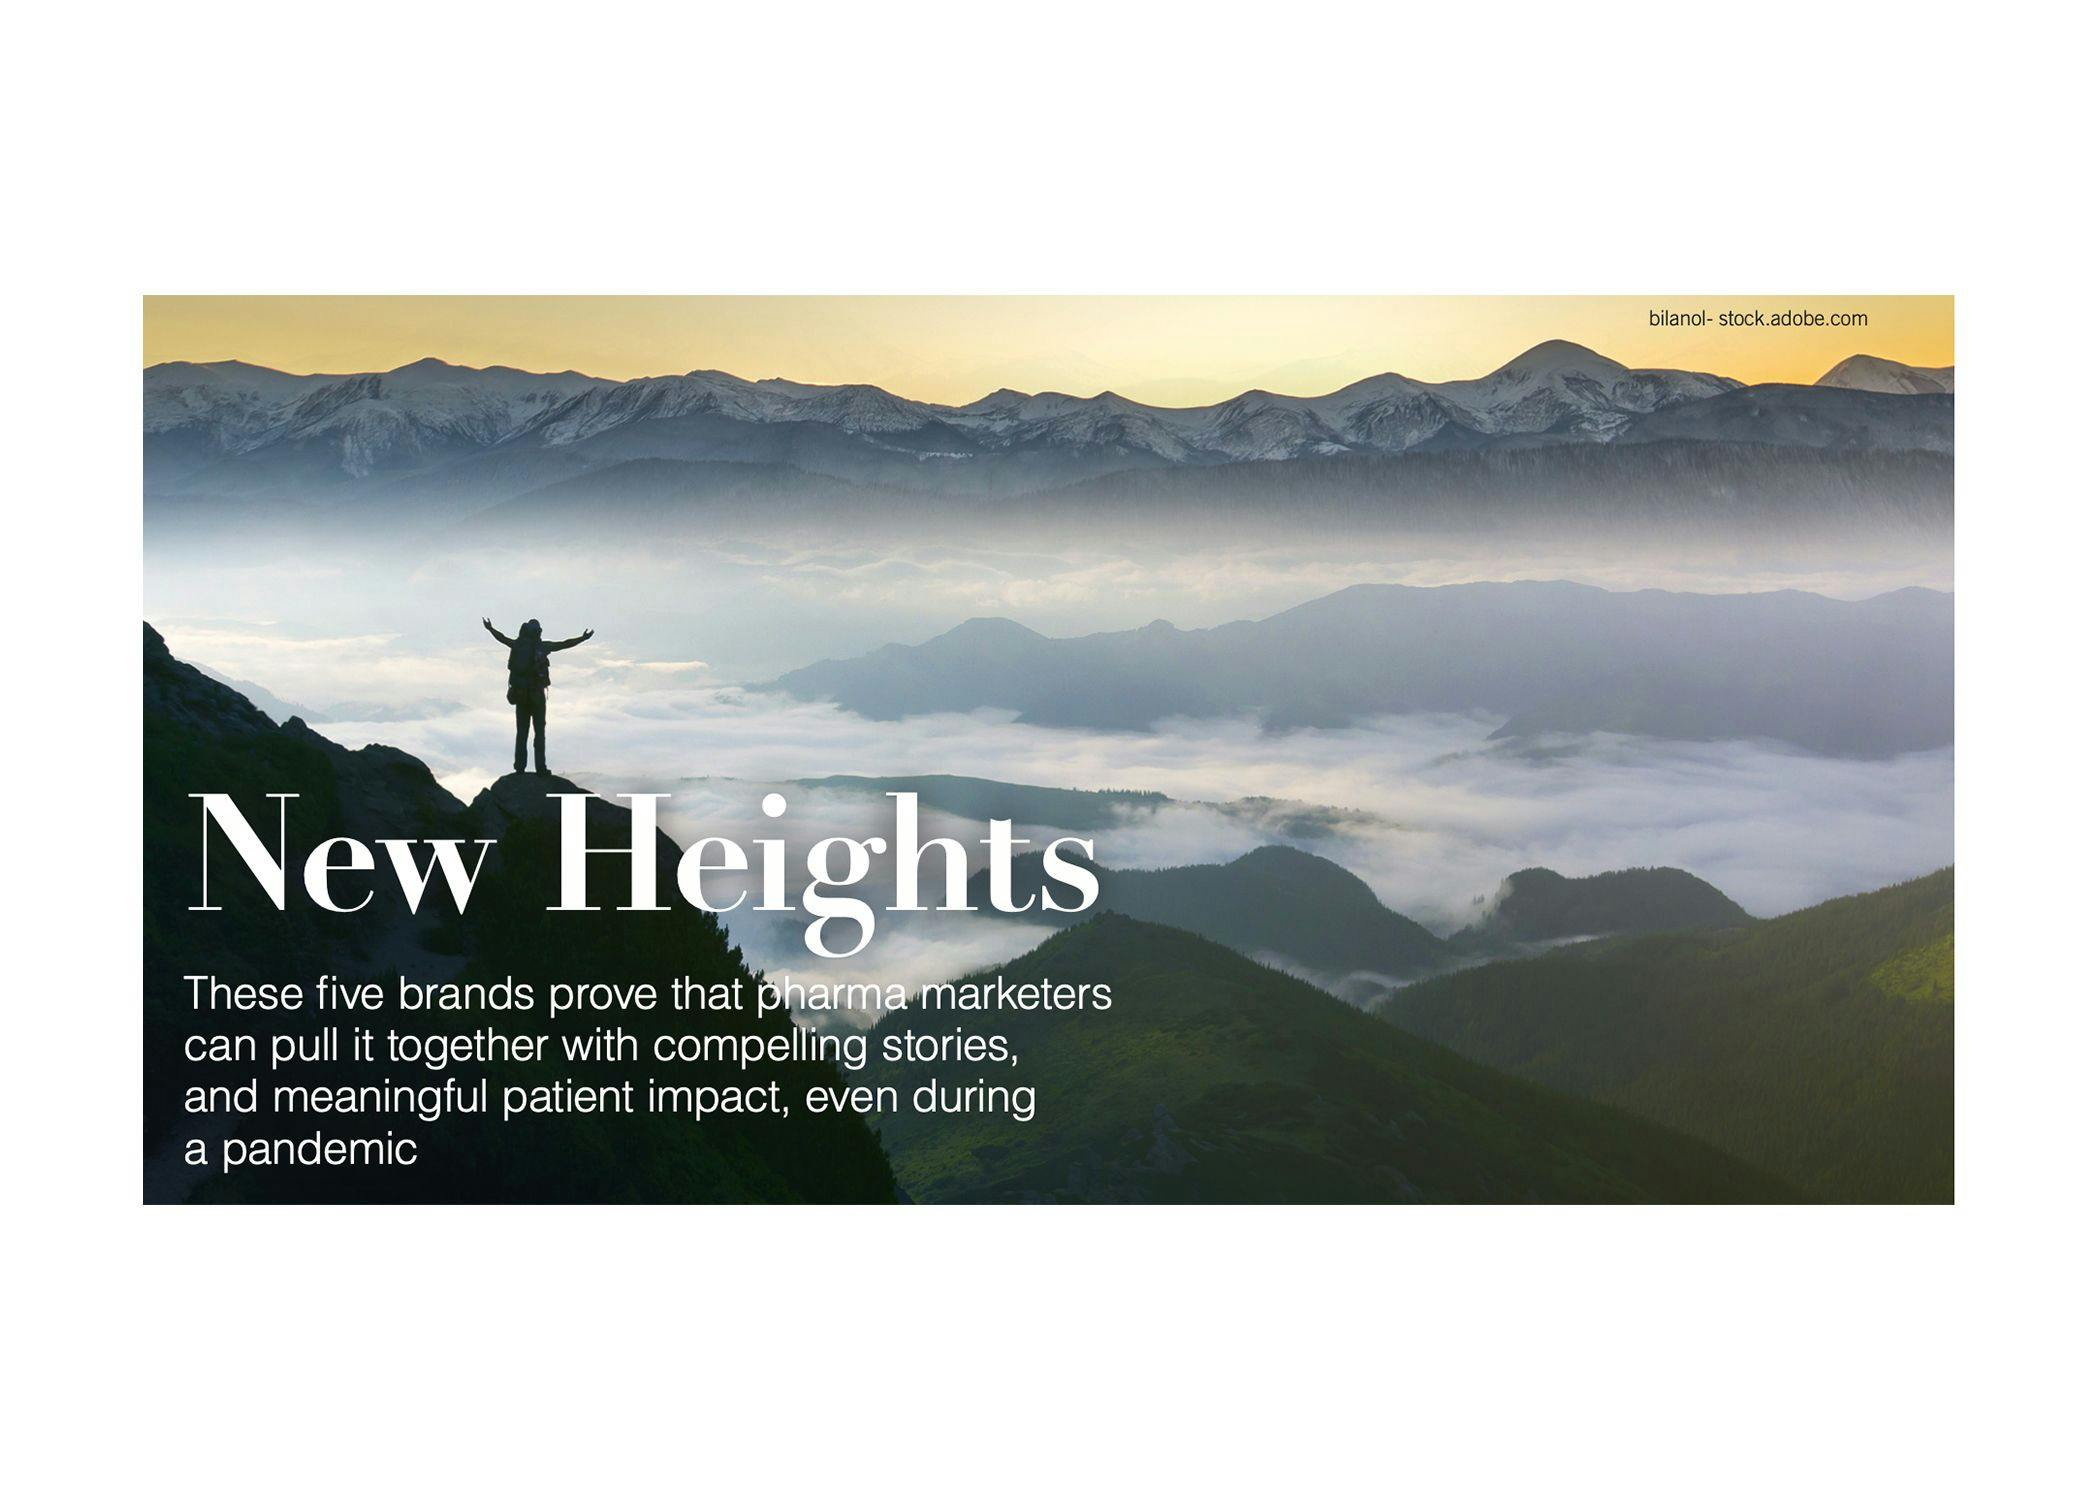 New Heights: Pharm Exec Profiles Five Recent Drug Launches